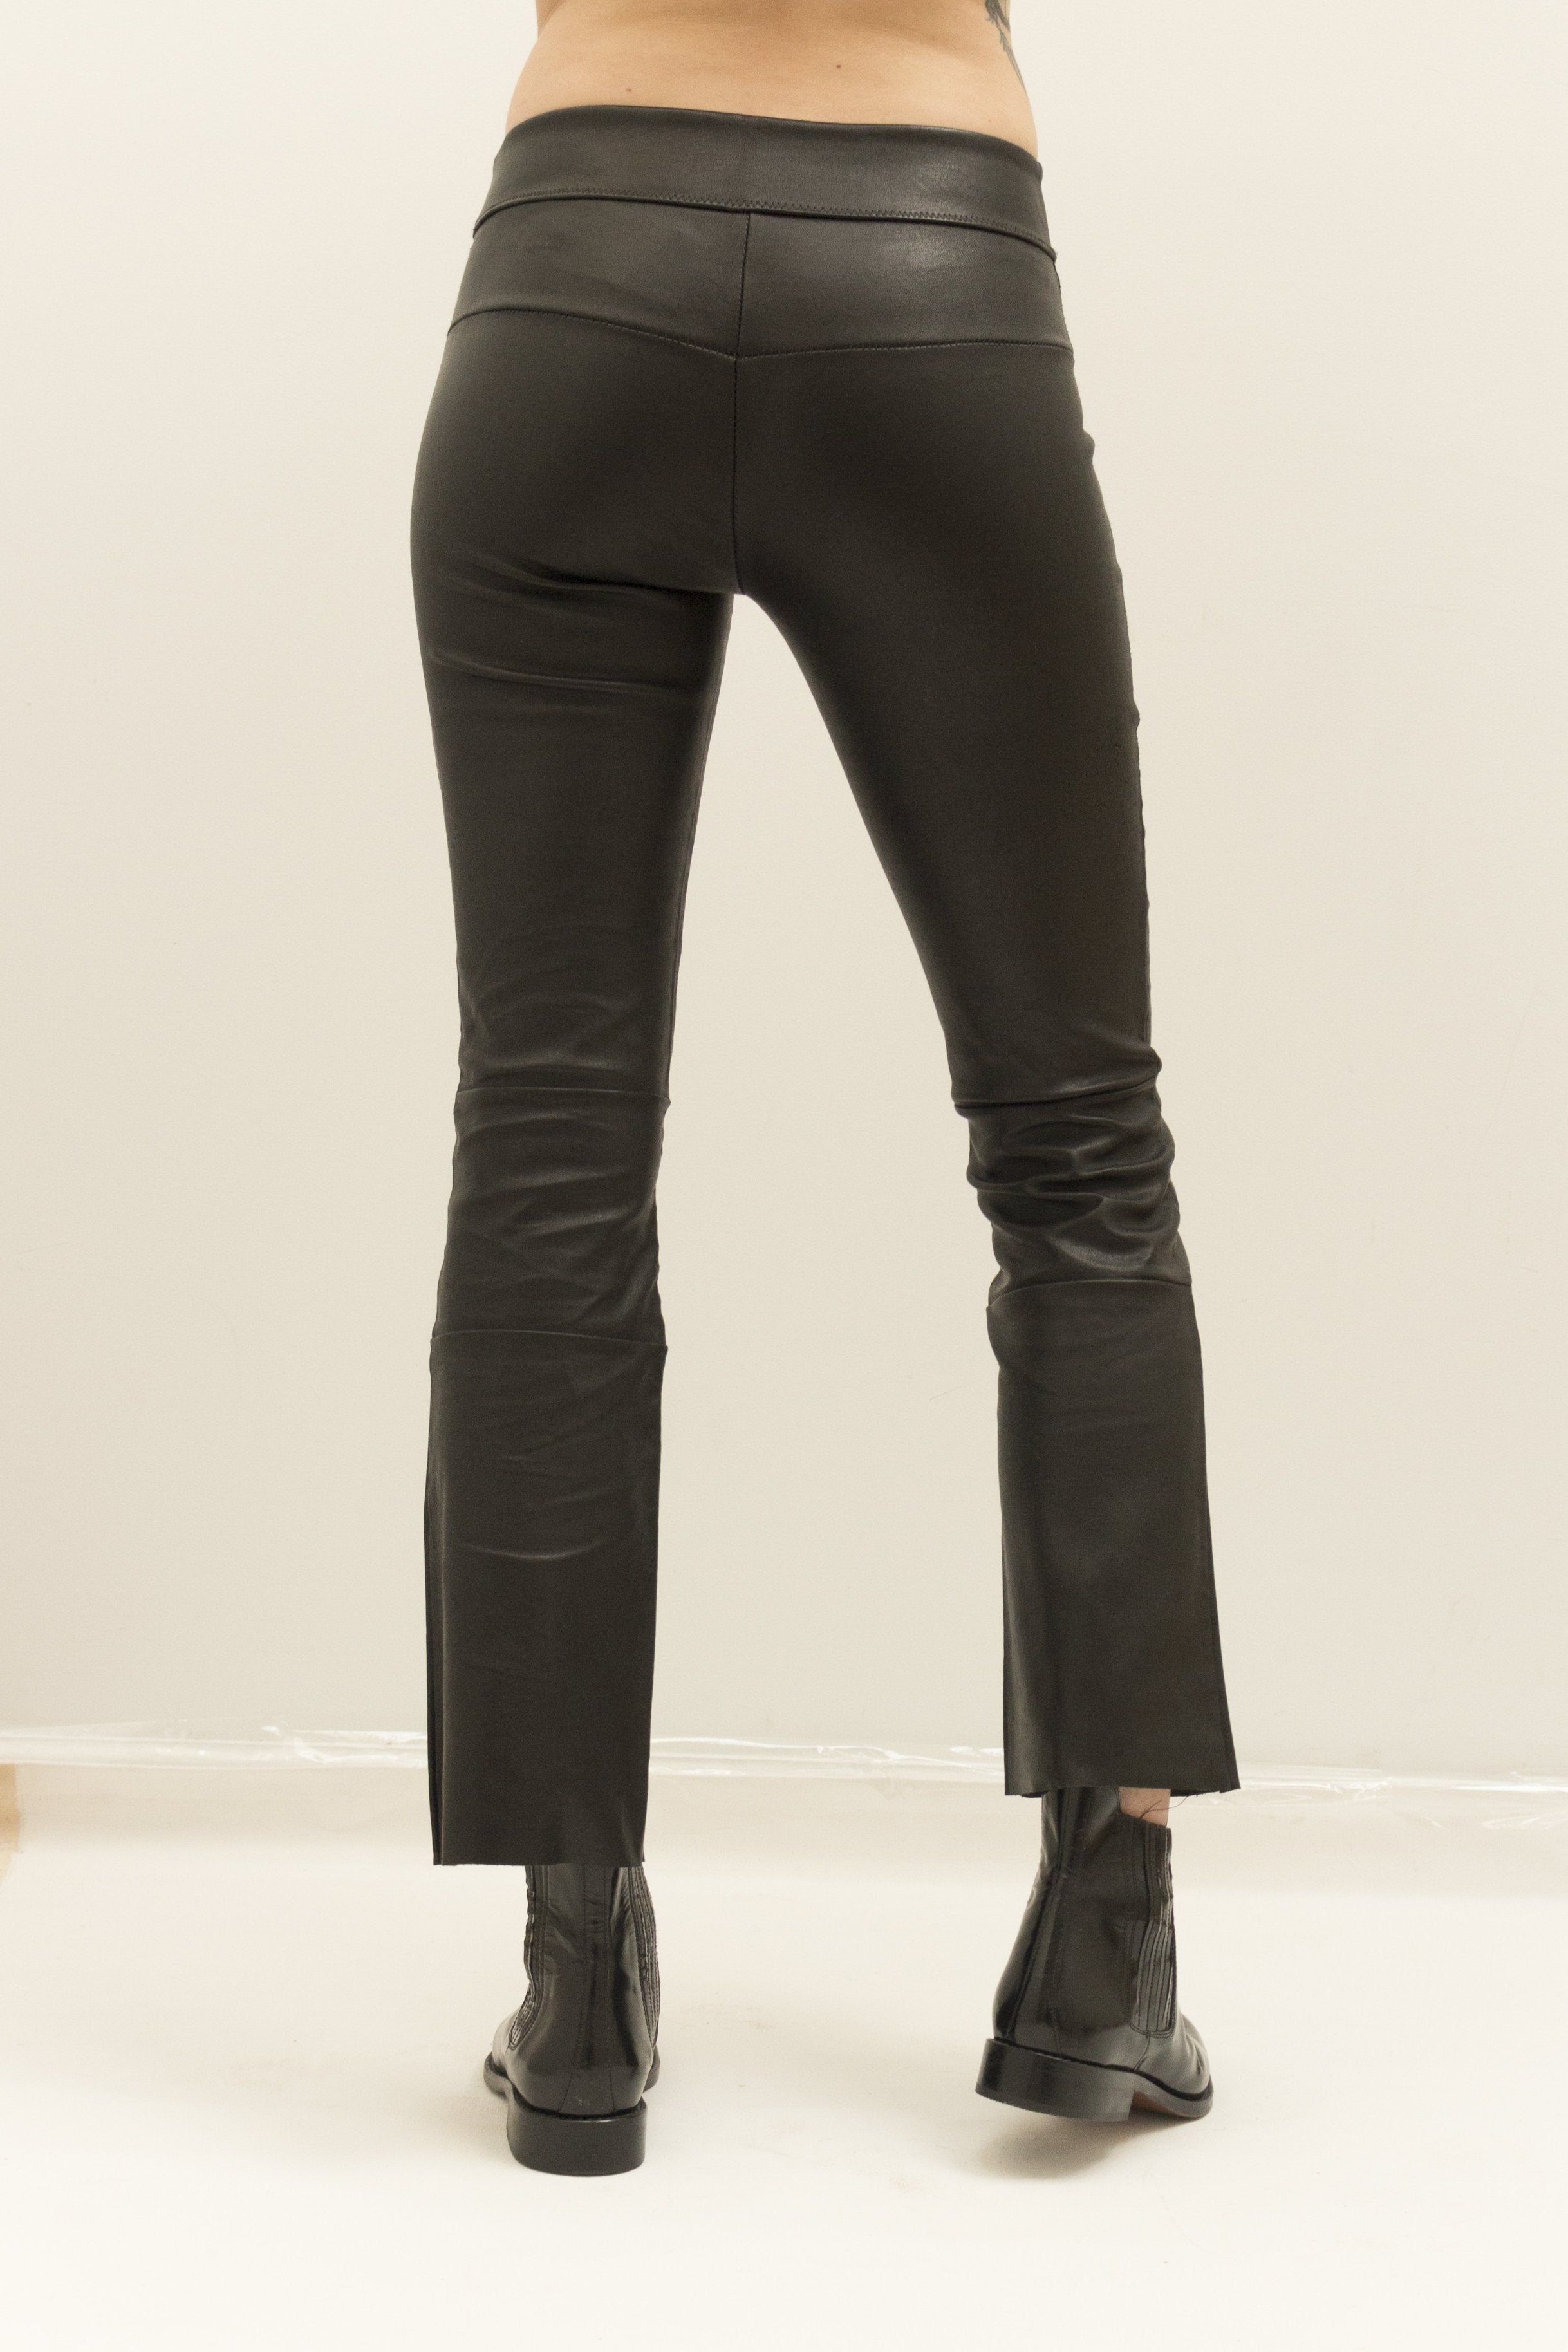 Copy of Cropped Stretch Leather Bootlegging